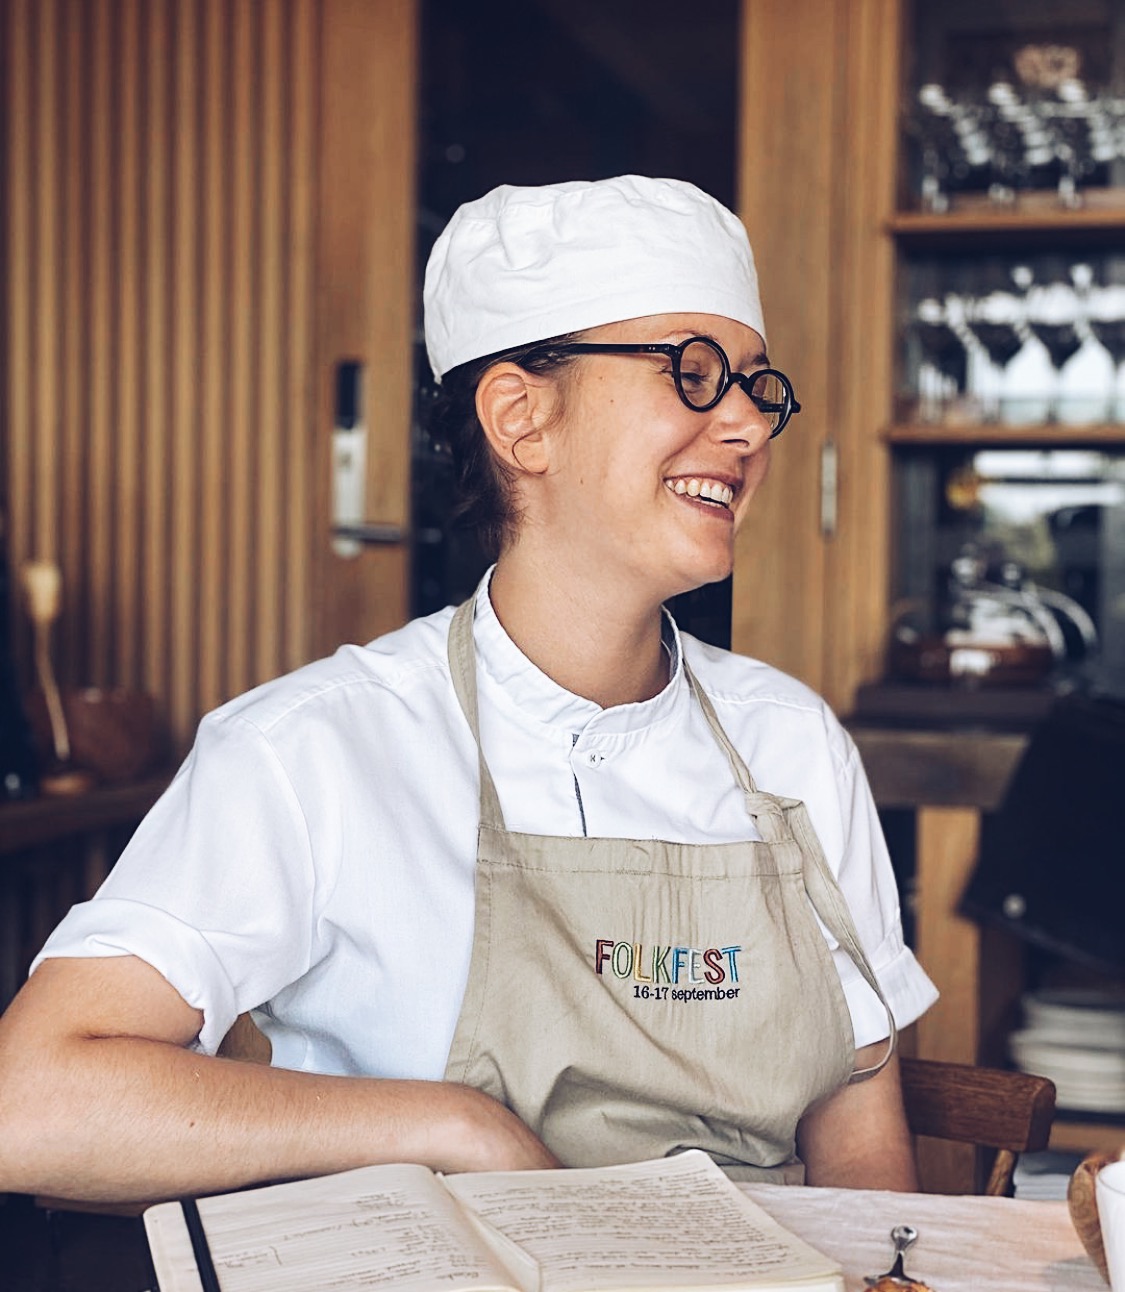 Léa Marion, winner of 360°Young Chef award 2020